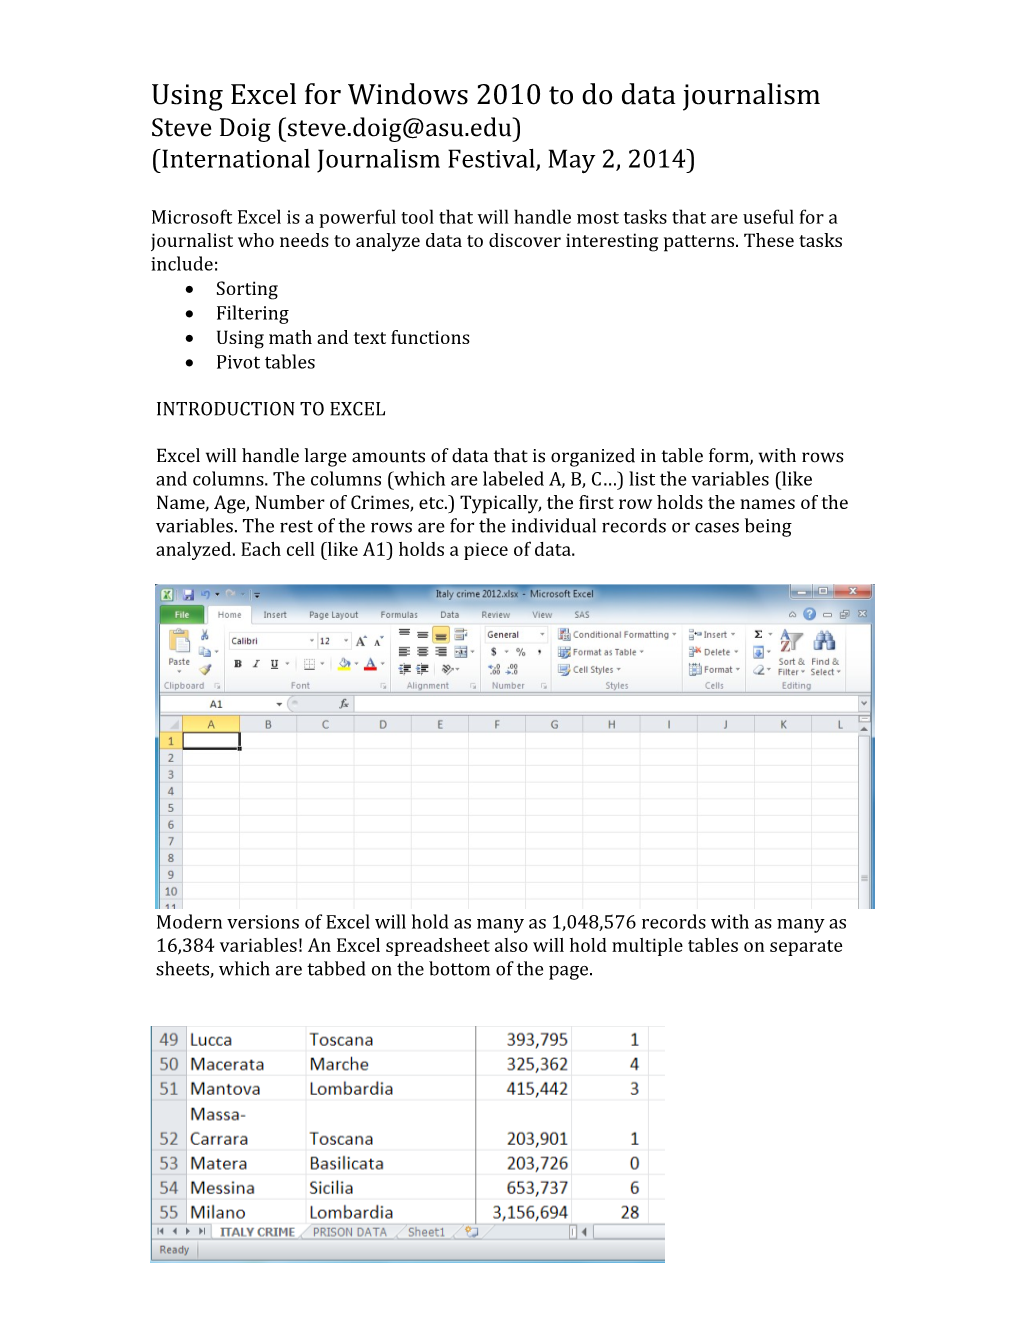 Using Excel for Windows 2010To Do Data Journalism